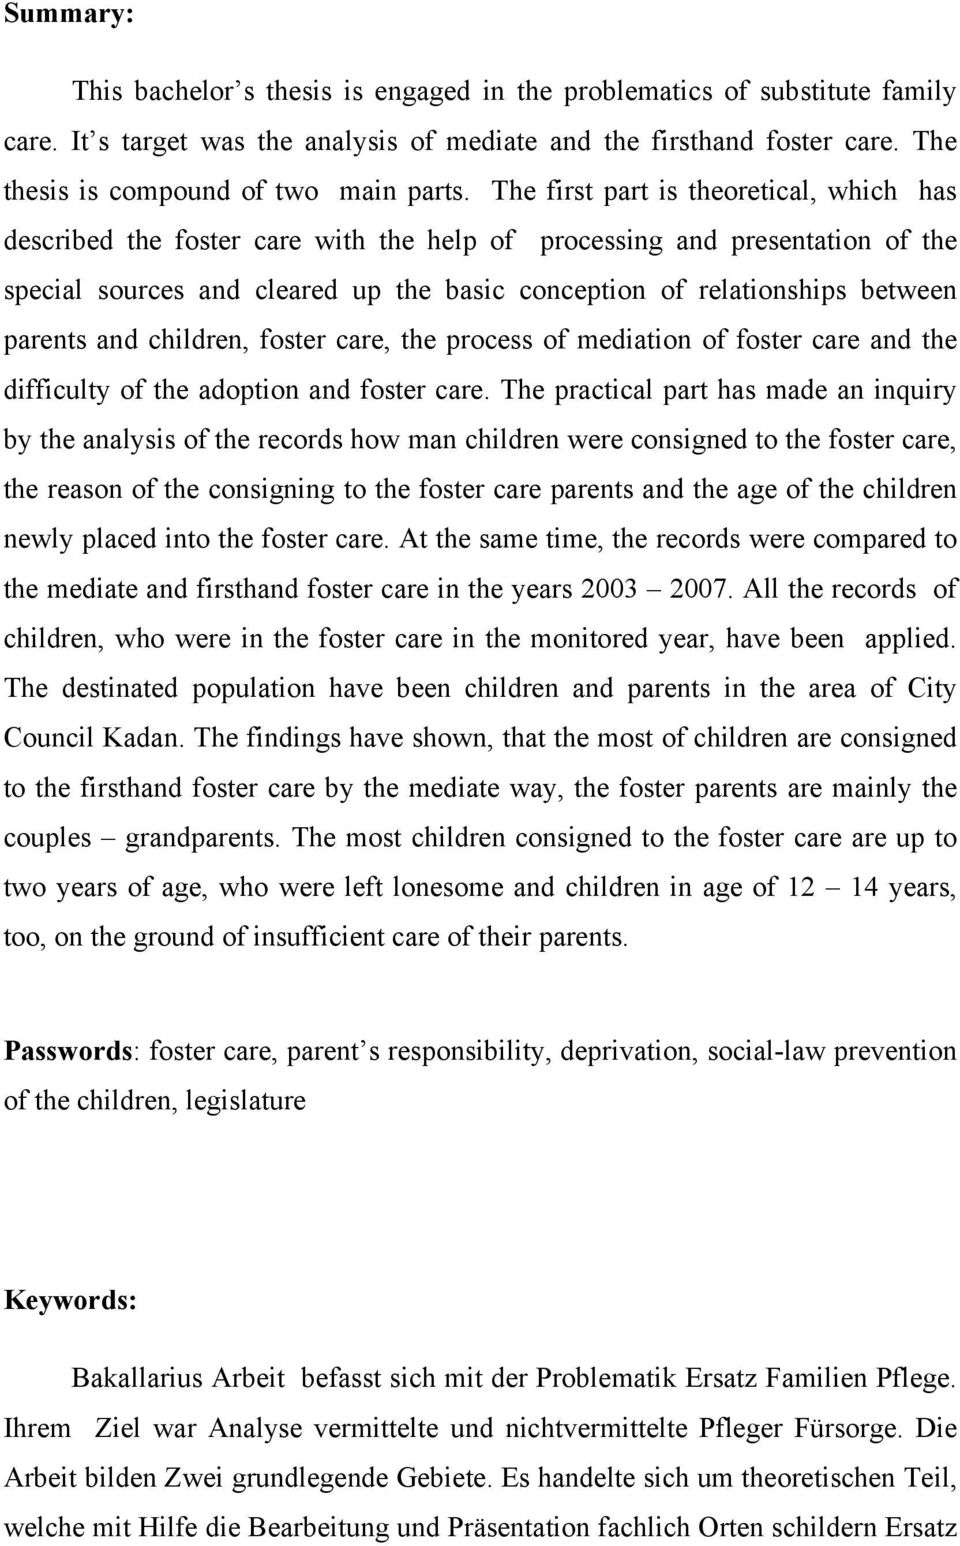 The first part is theoretical, which has described the foster care with the help of processing and presentation of the special sources and cleared up the basic conception of relationships between